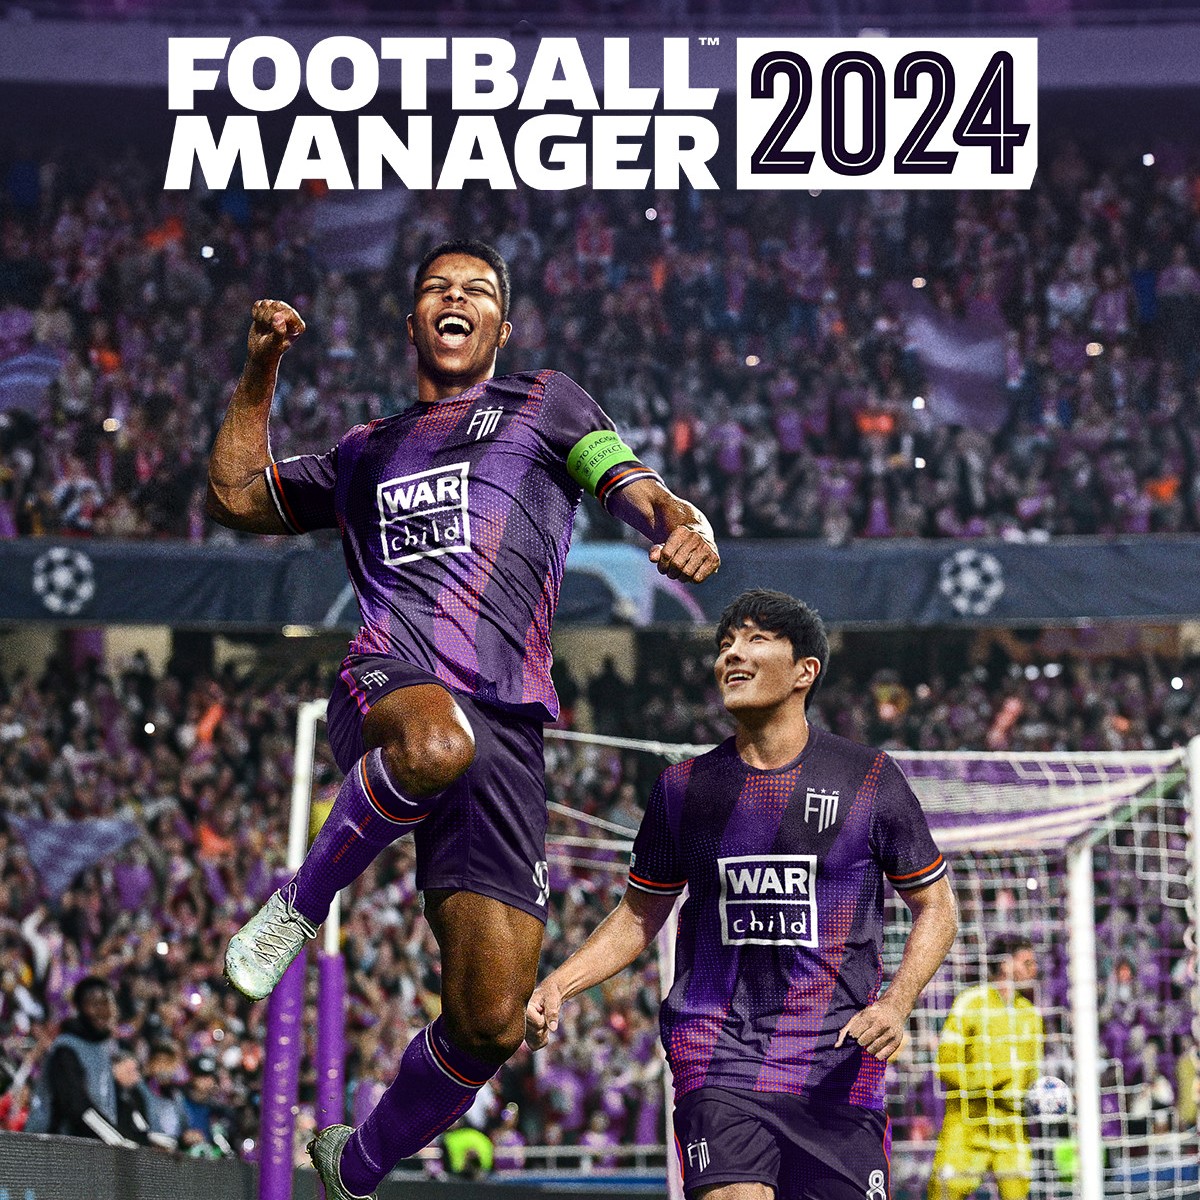 Buy Football Manager 2024 + InGame Editor Steam Offline cheap